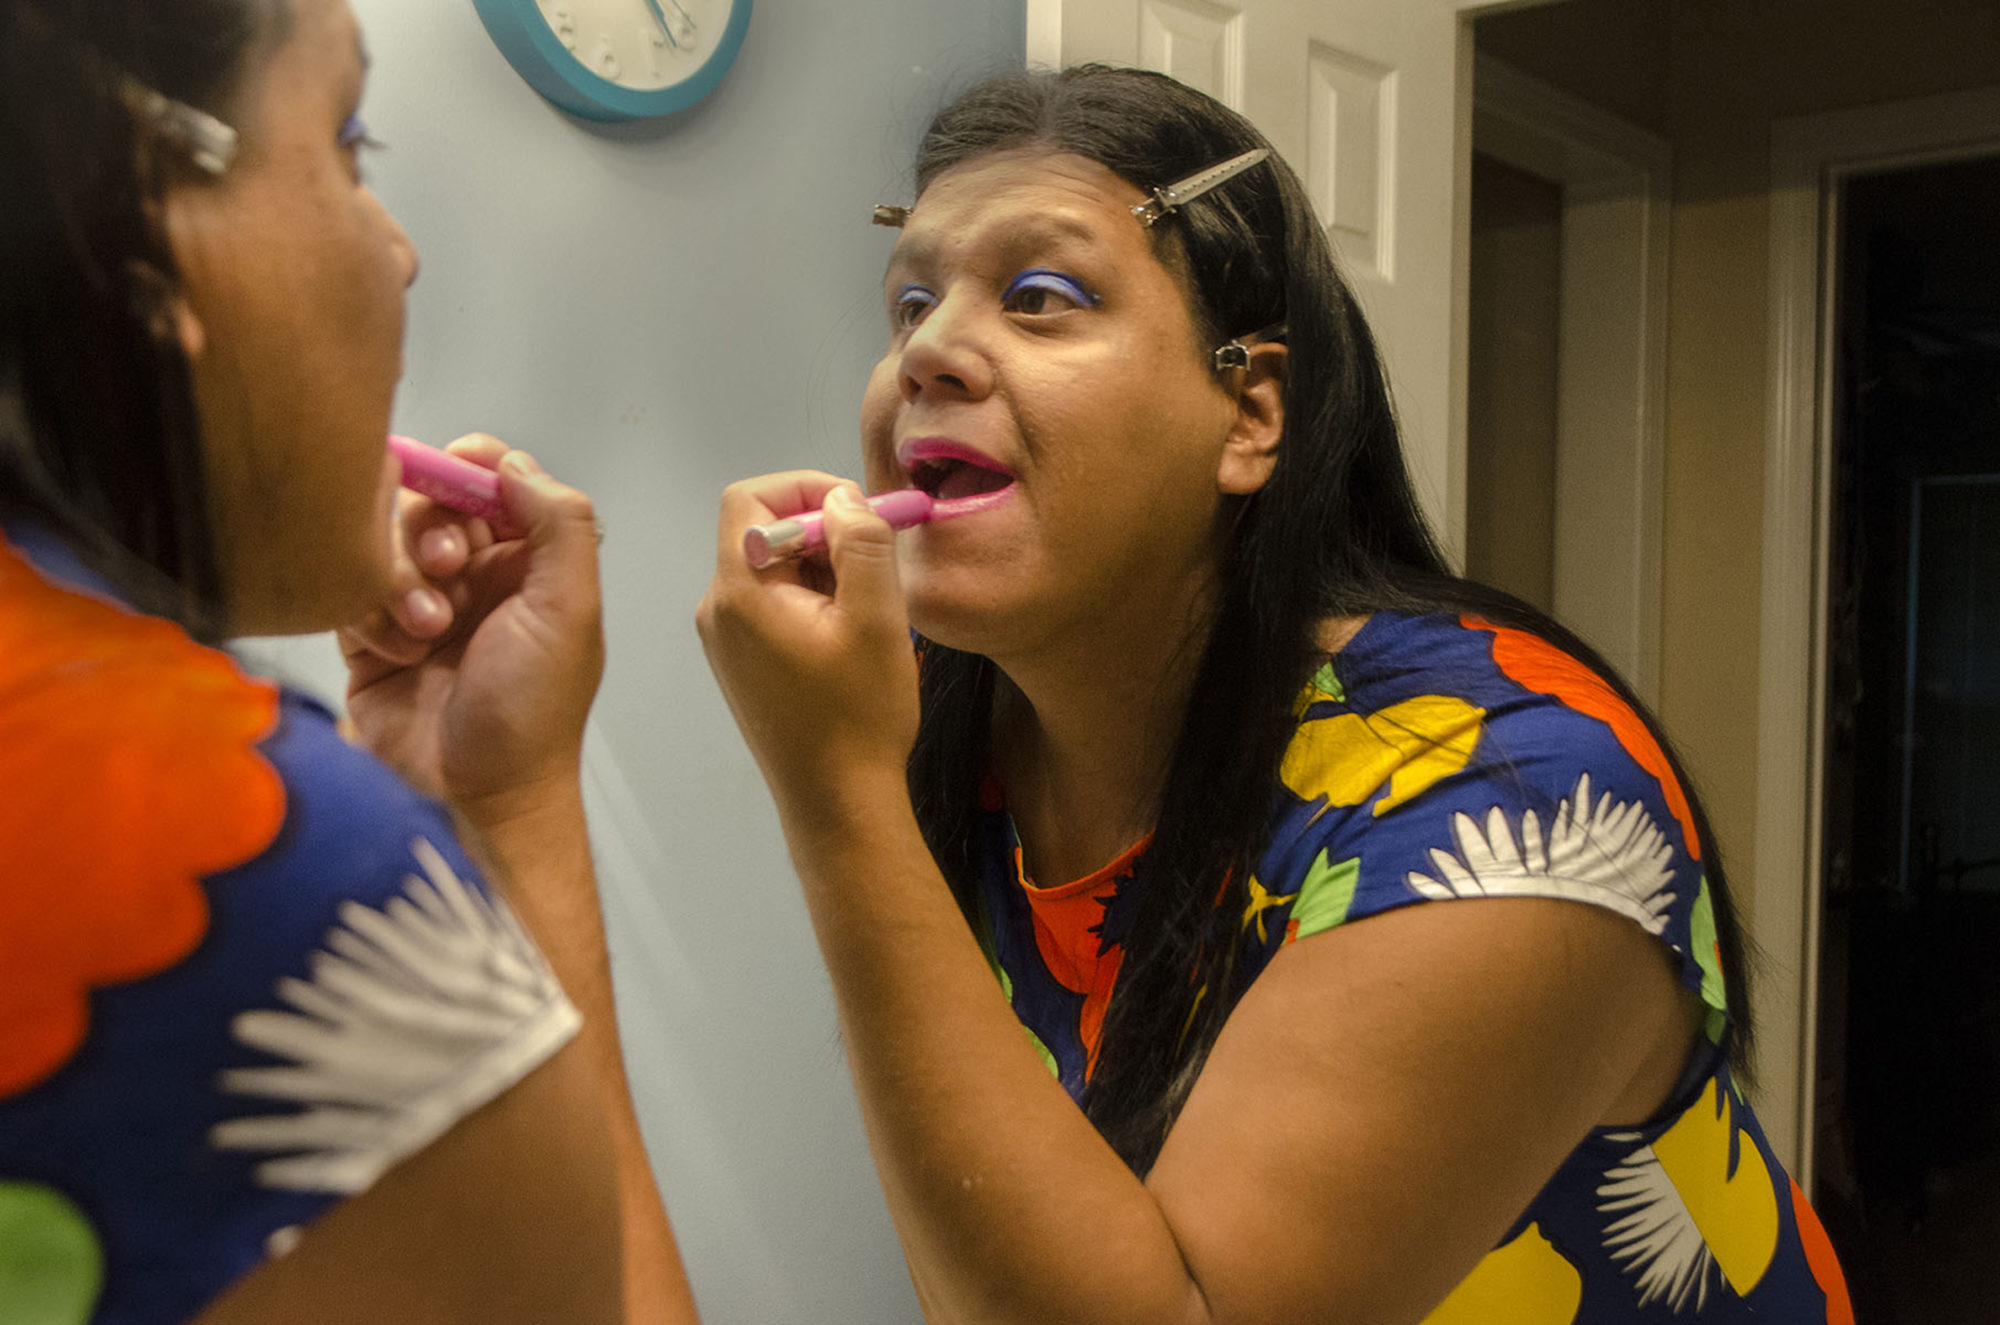 A woman puts lipstick on in a mirror